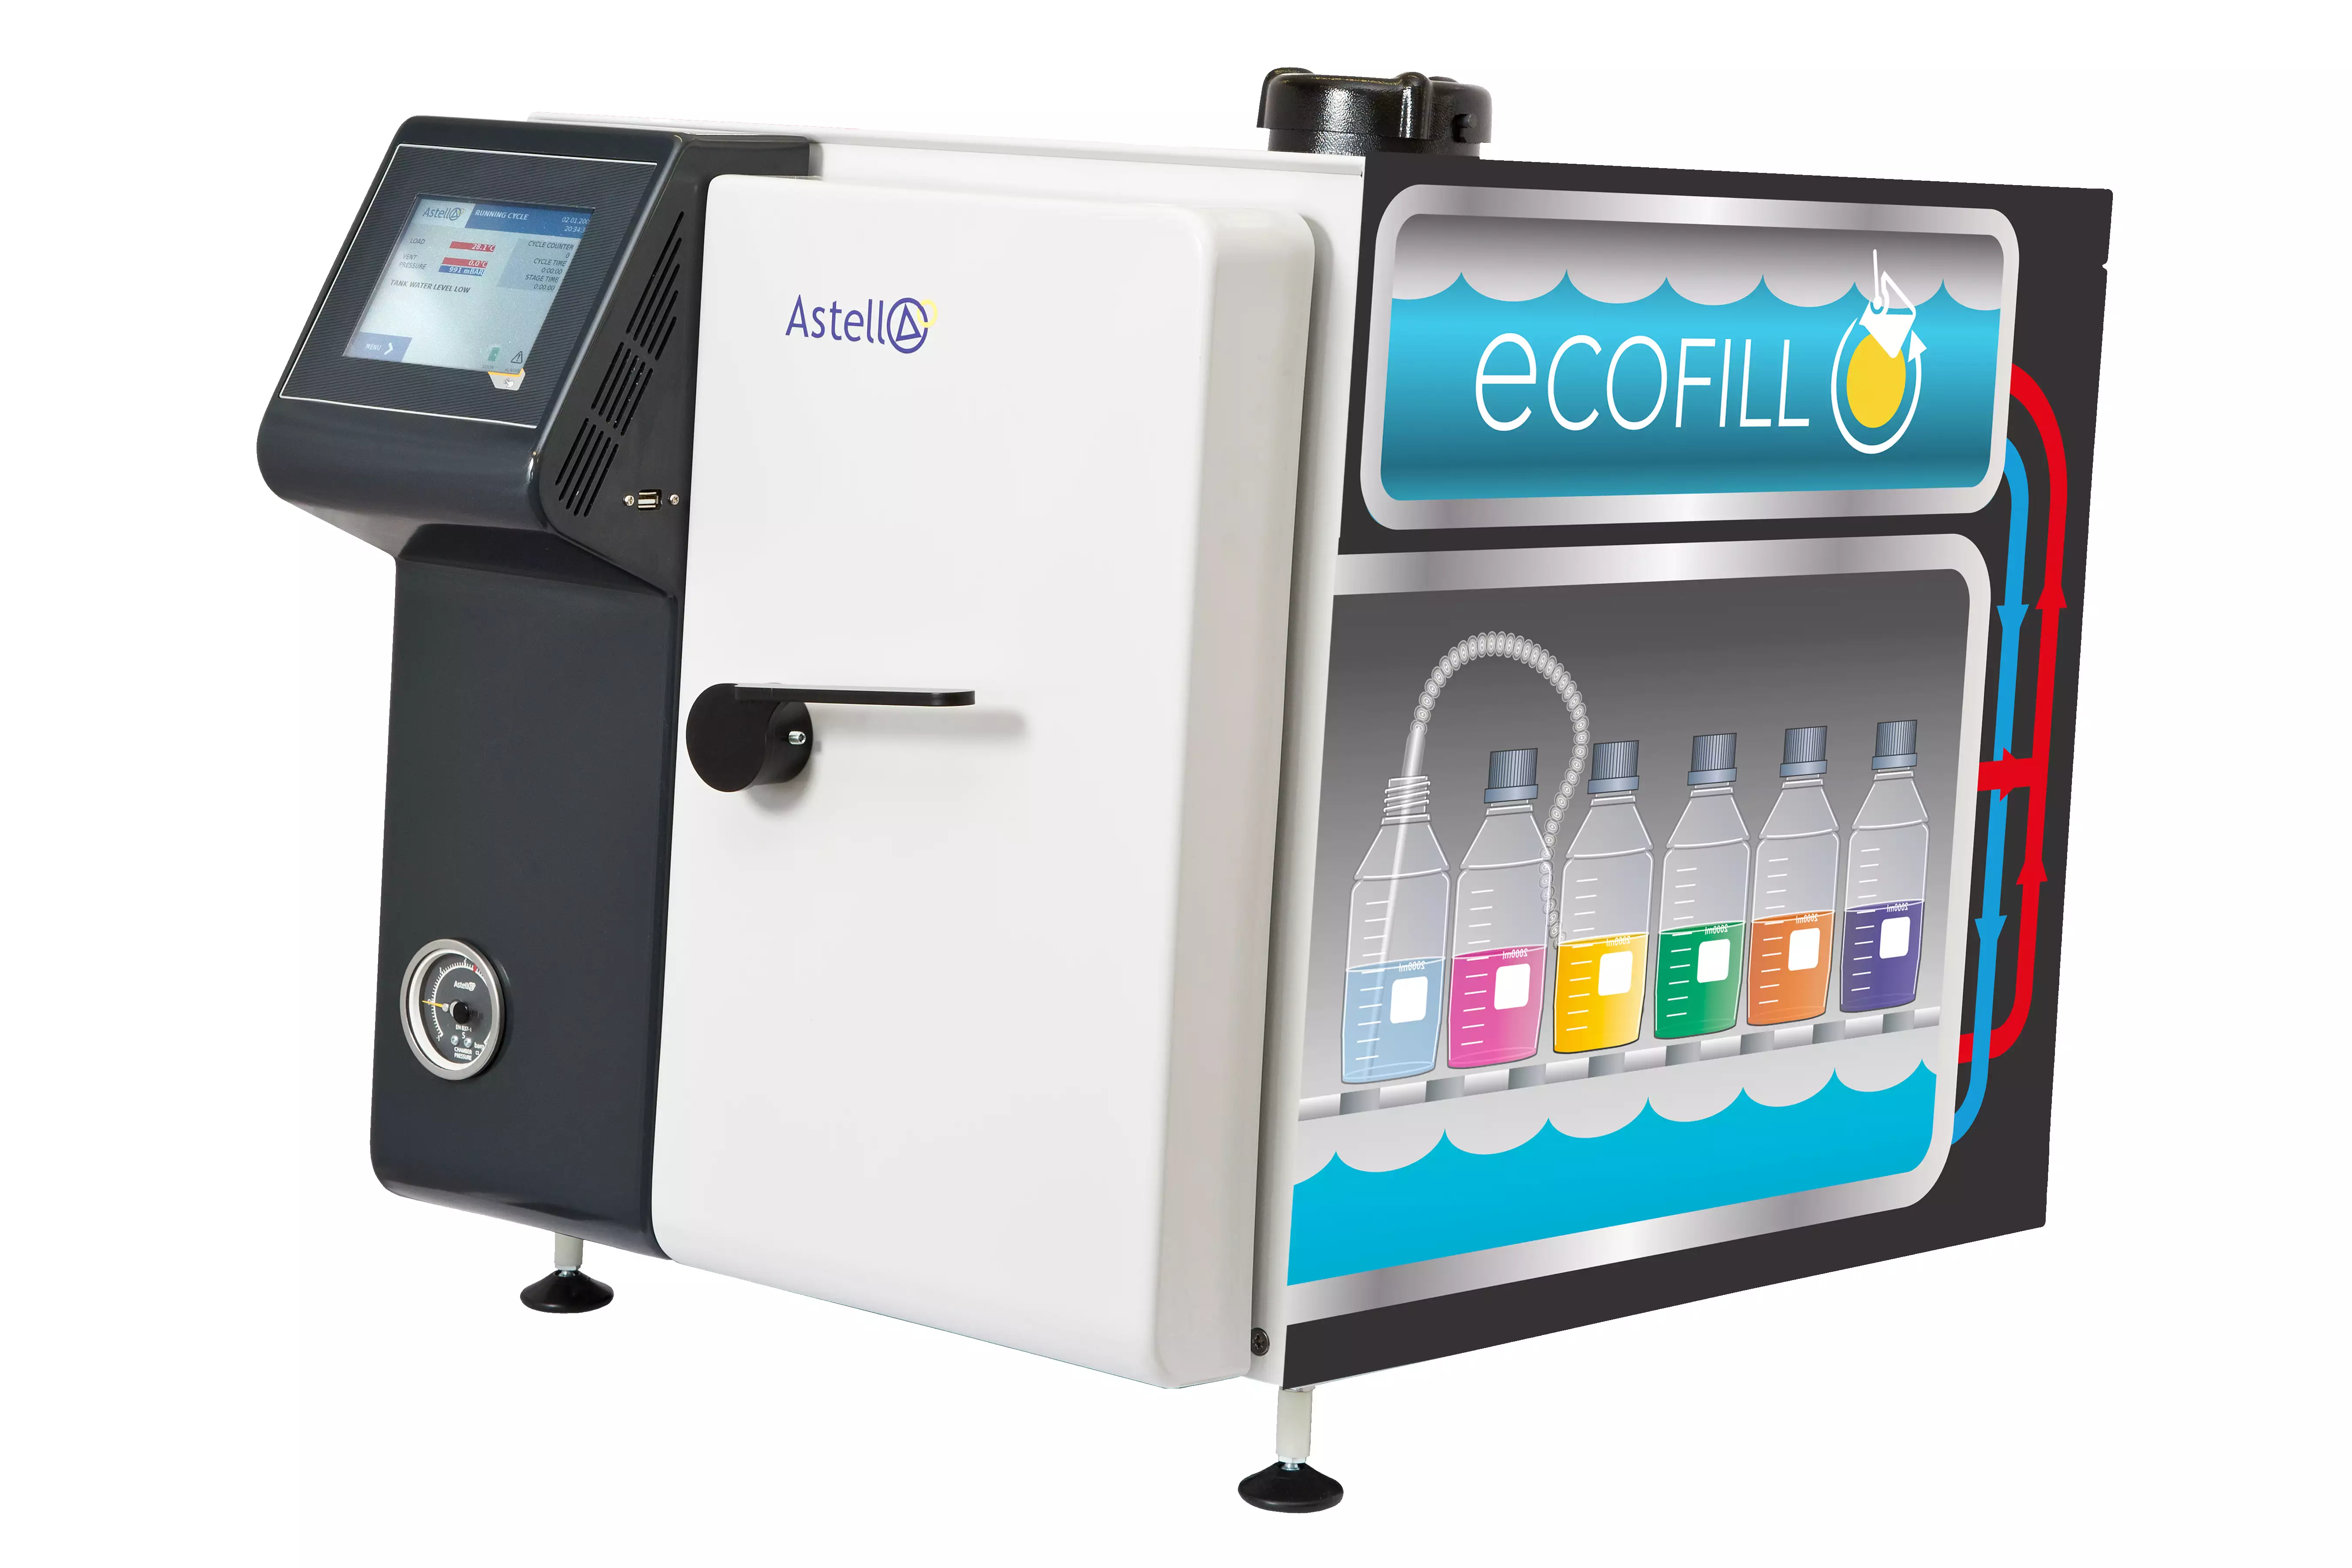 Astell Ecofill Autoclaves: Still Leading the Way in Eco-Friendly Autoclaves After 25 Years